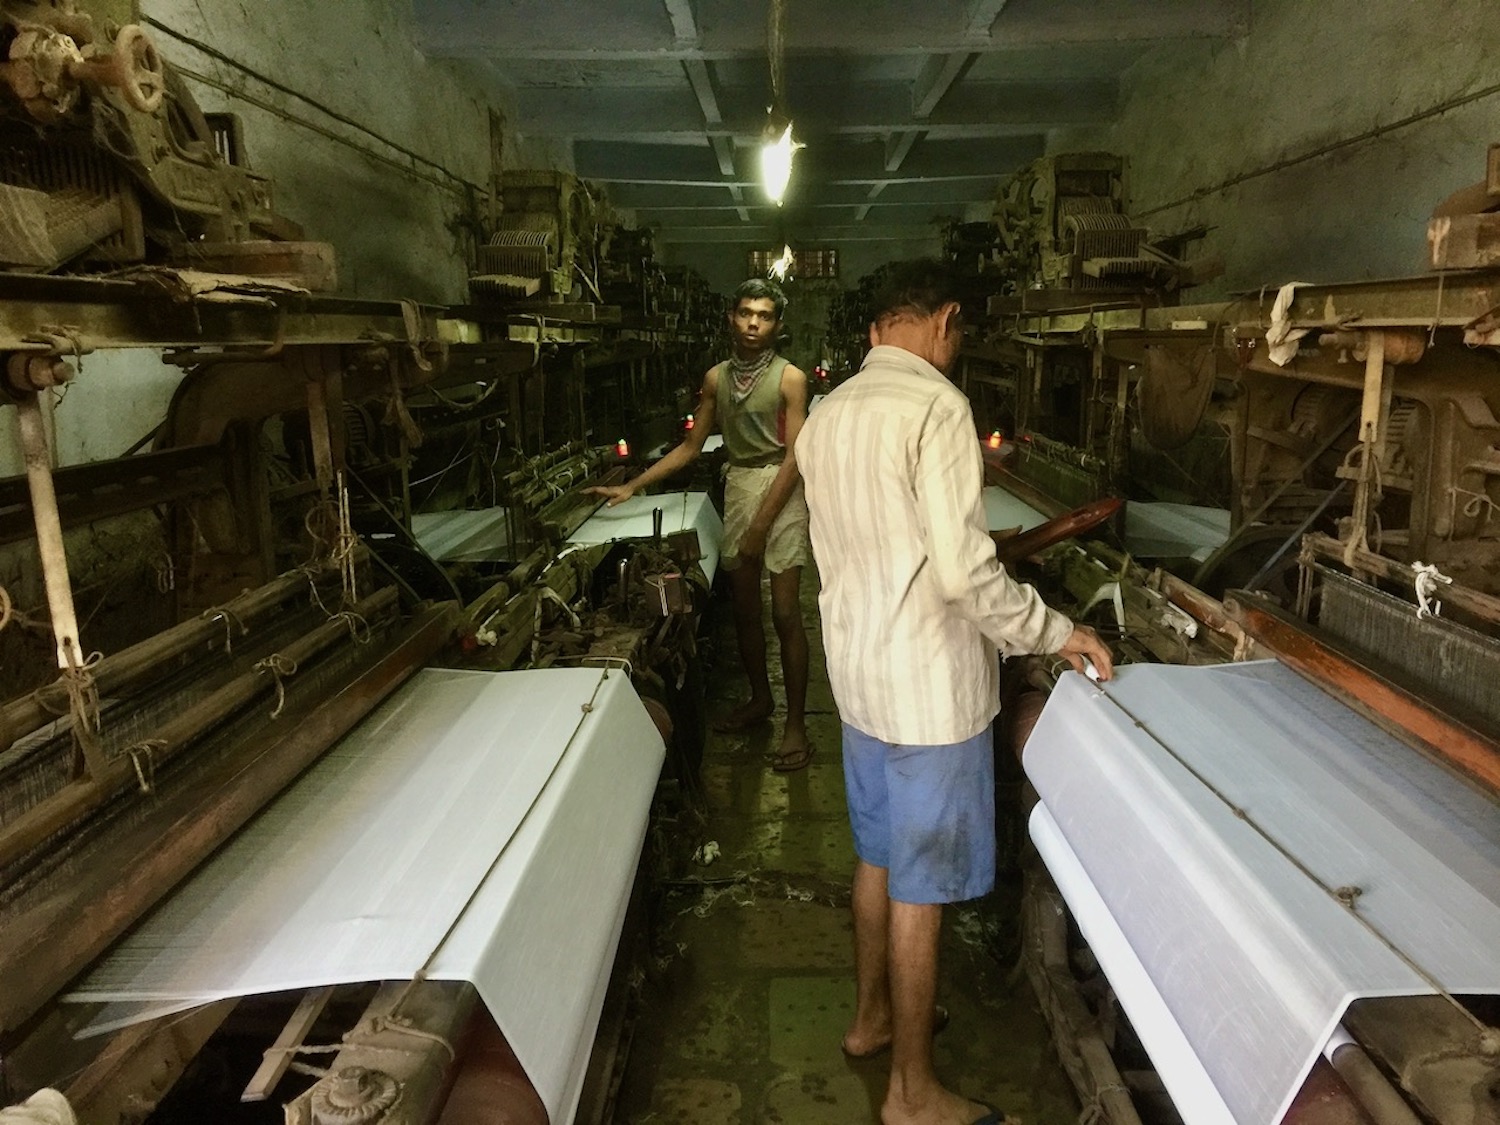 An older man and a younger man, working in a cramped factory.